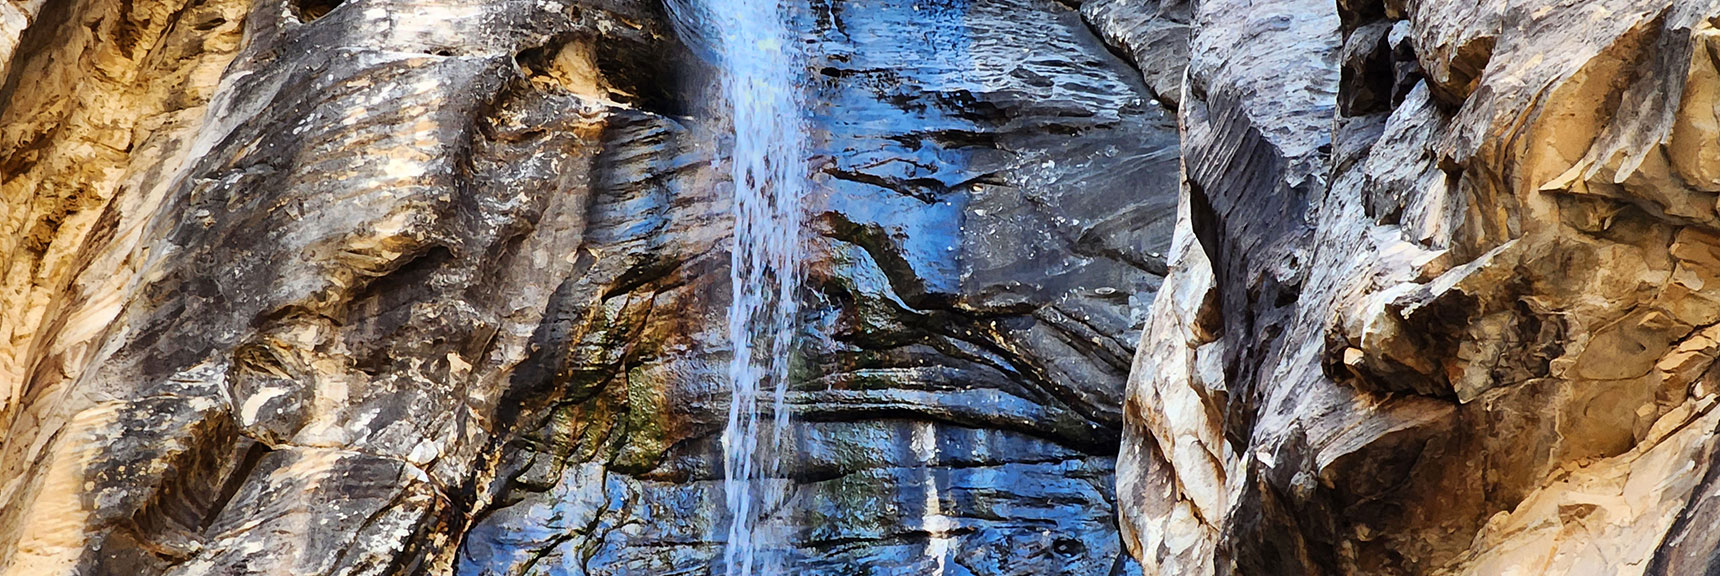 Closer View of Upper Waterfall | Ice Box Canyon | Red Rock Canyon NCA, Nevada | Las Vegas Area Trails | David Smith